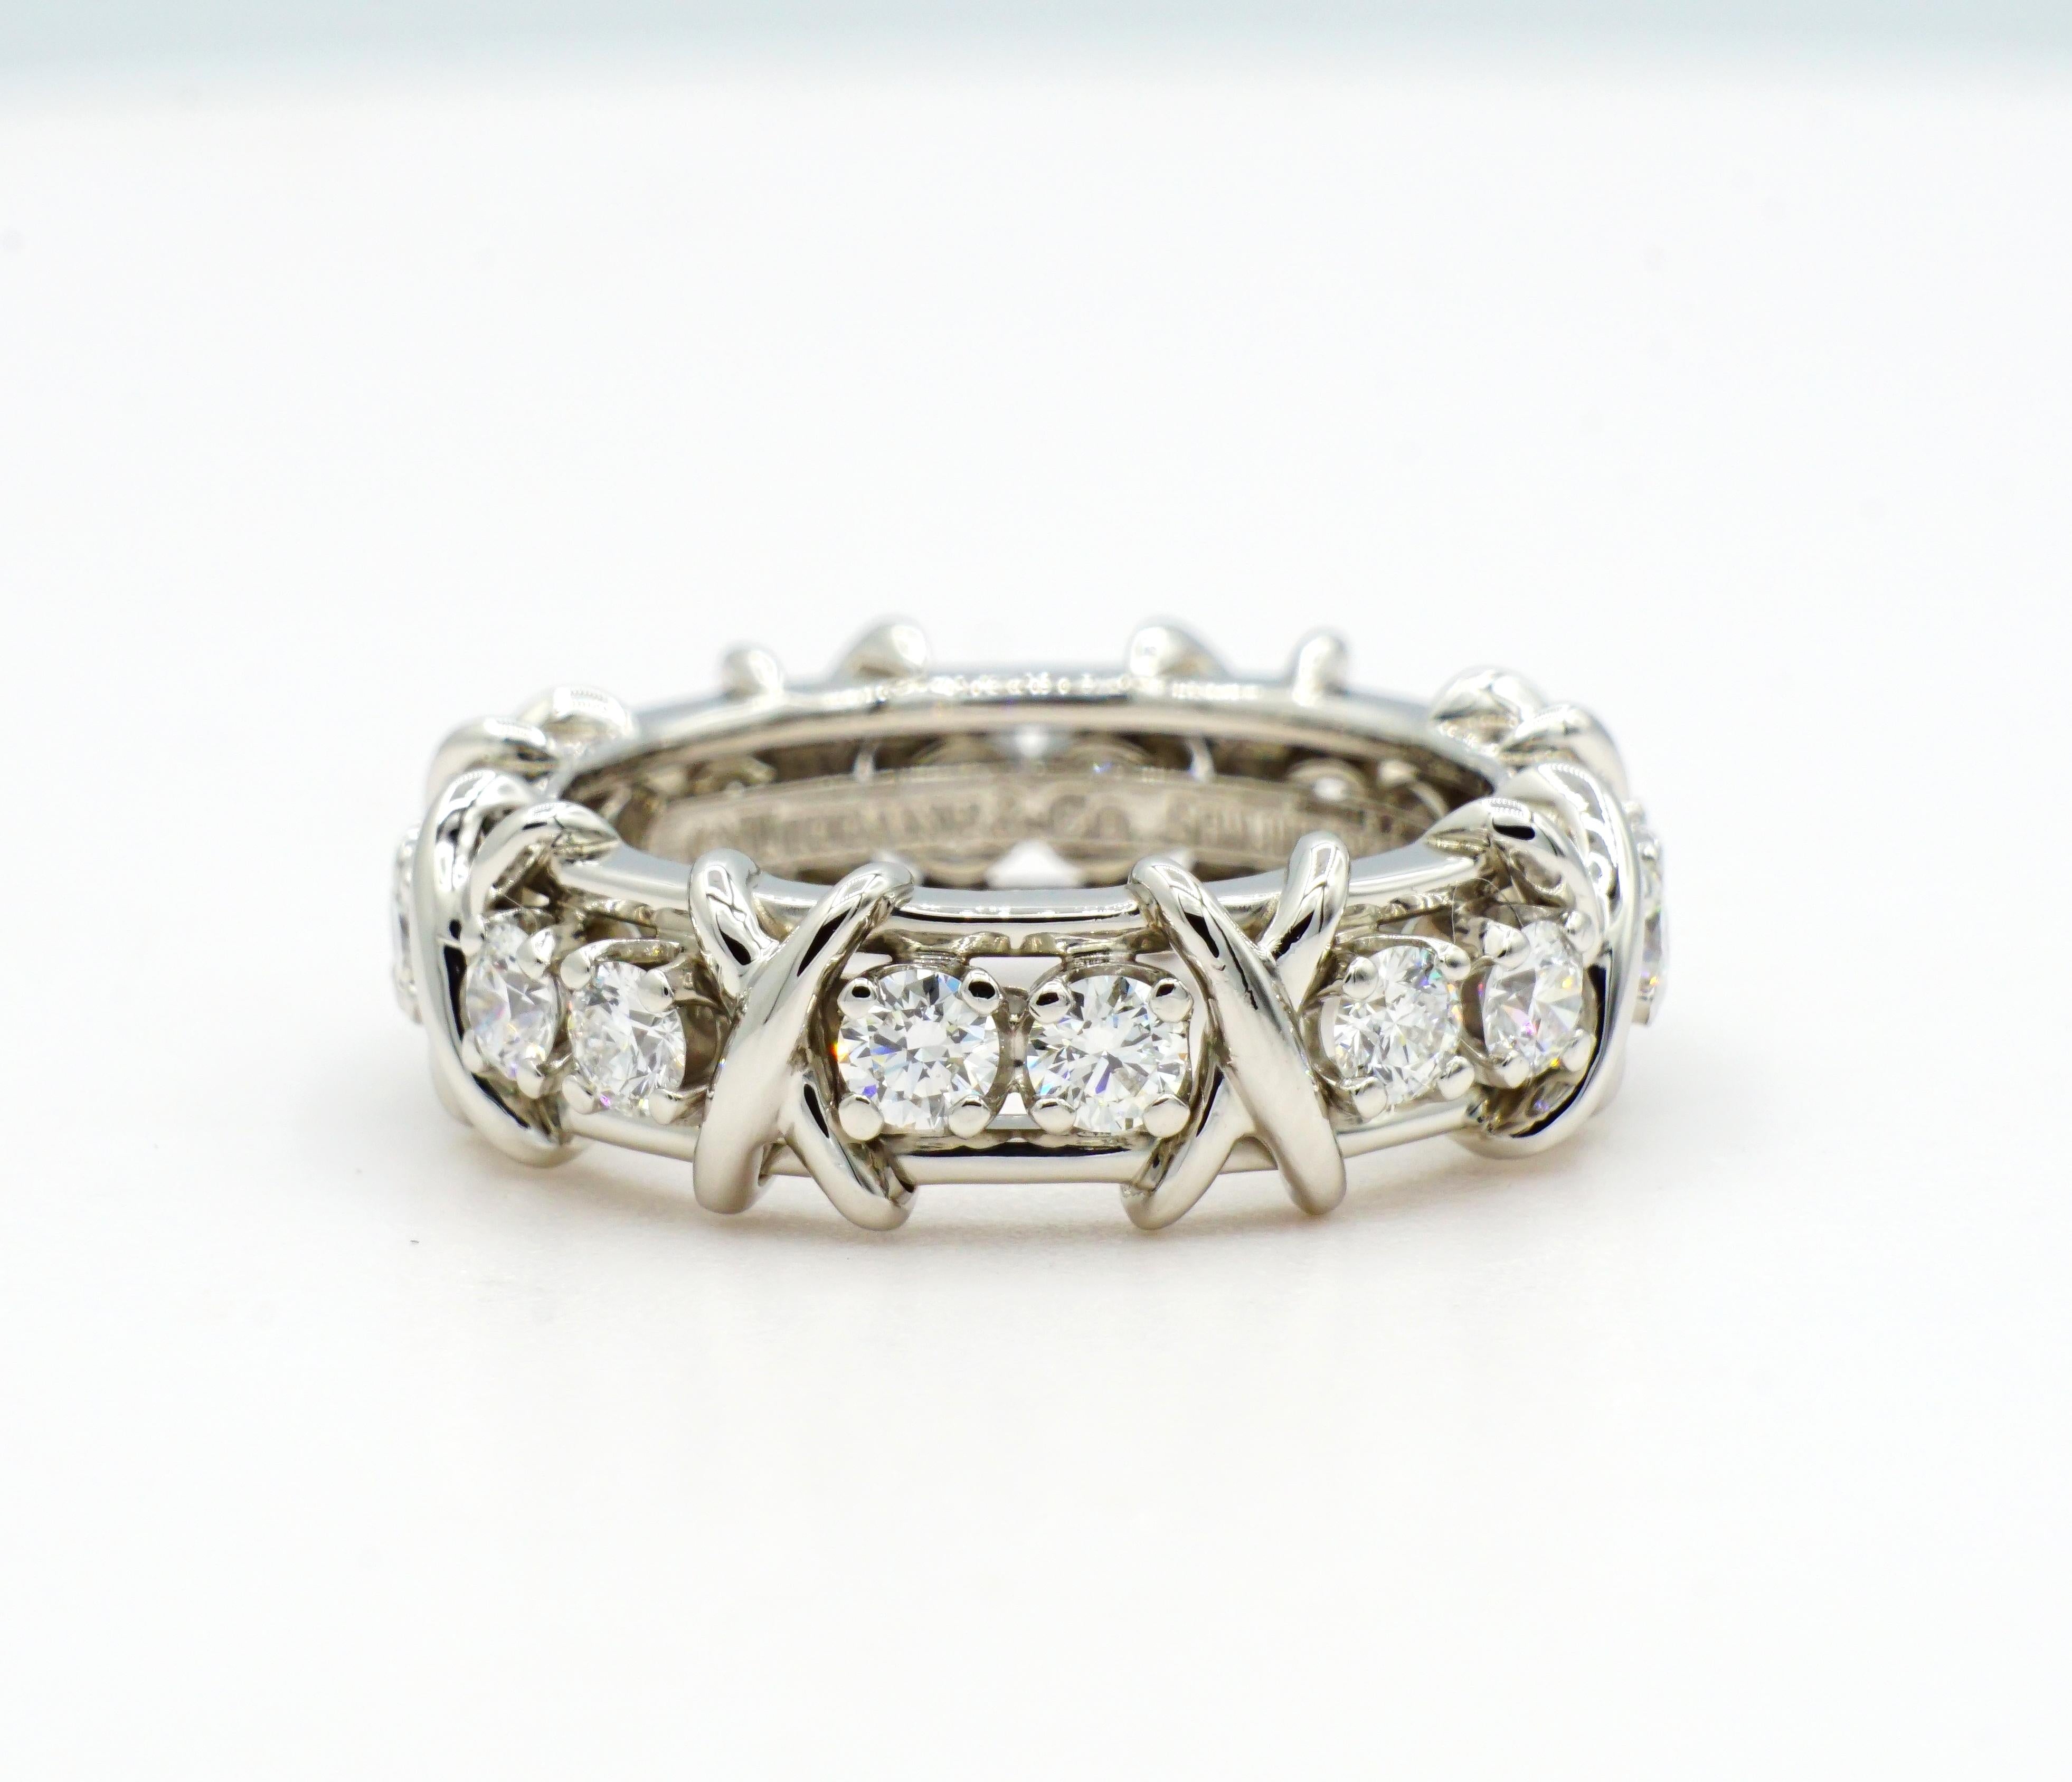 Platinum Tiffany & Co. Schlumberger X Sixteen Stone Diamond Eternity Ring. This ring is a size 5.5, 6.6m wide, 3.4mm thick, with sixteen prong set round diamonds of approximately 1.28cttw that are F color and VS2 in clarity. Overall, this ring is in